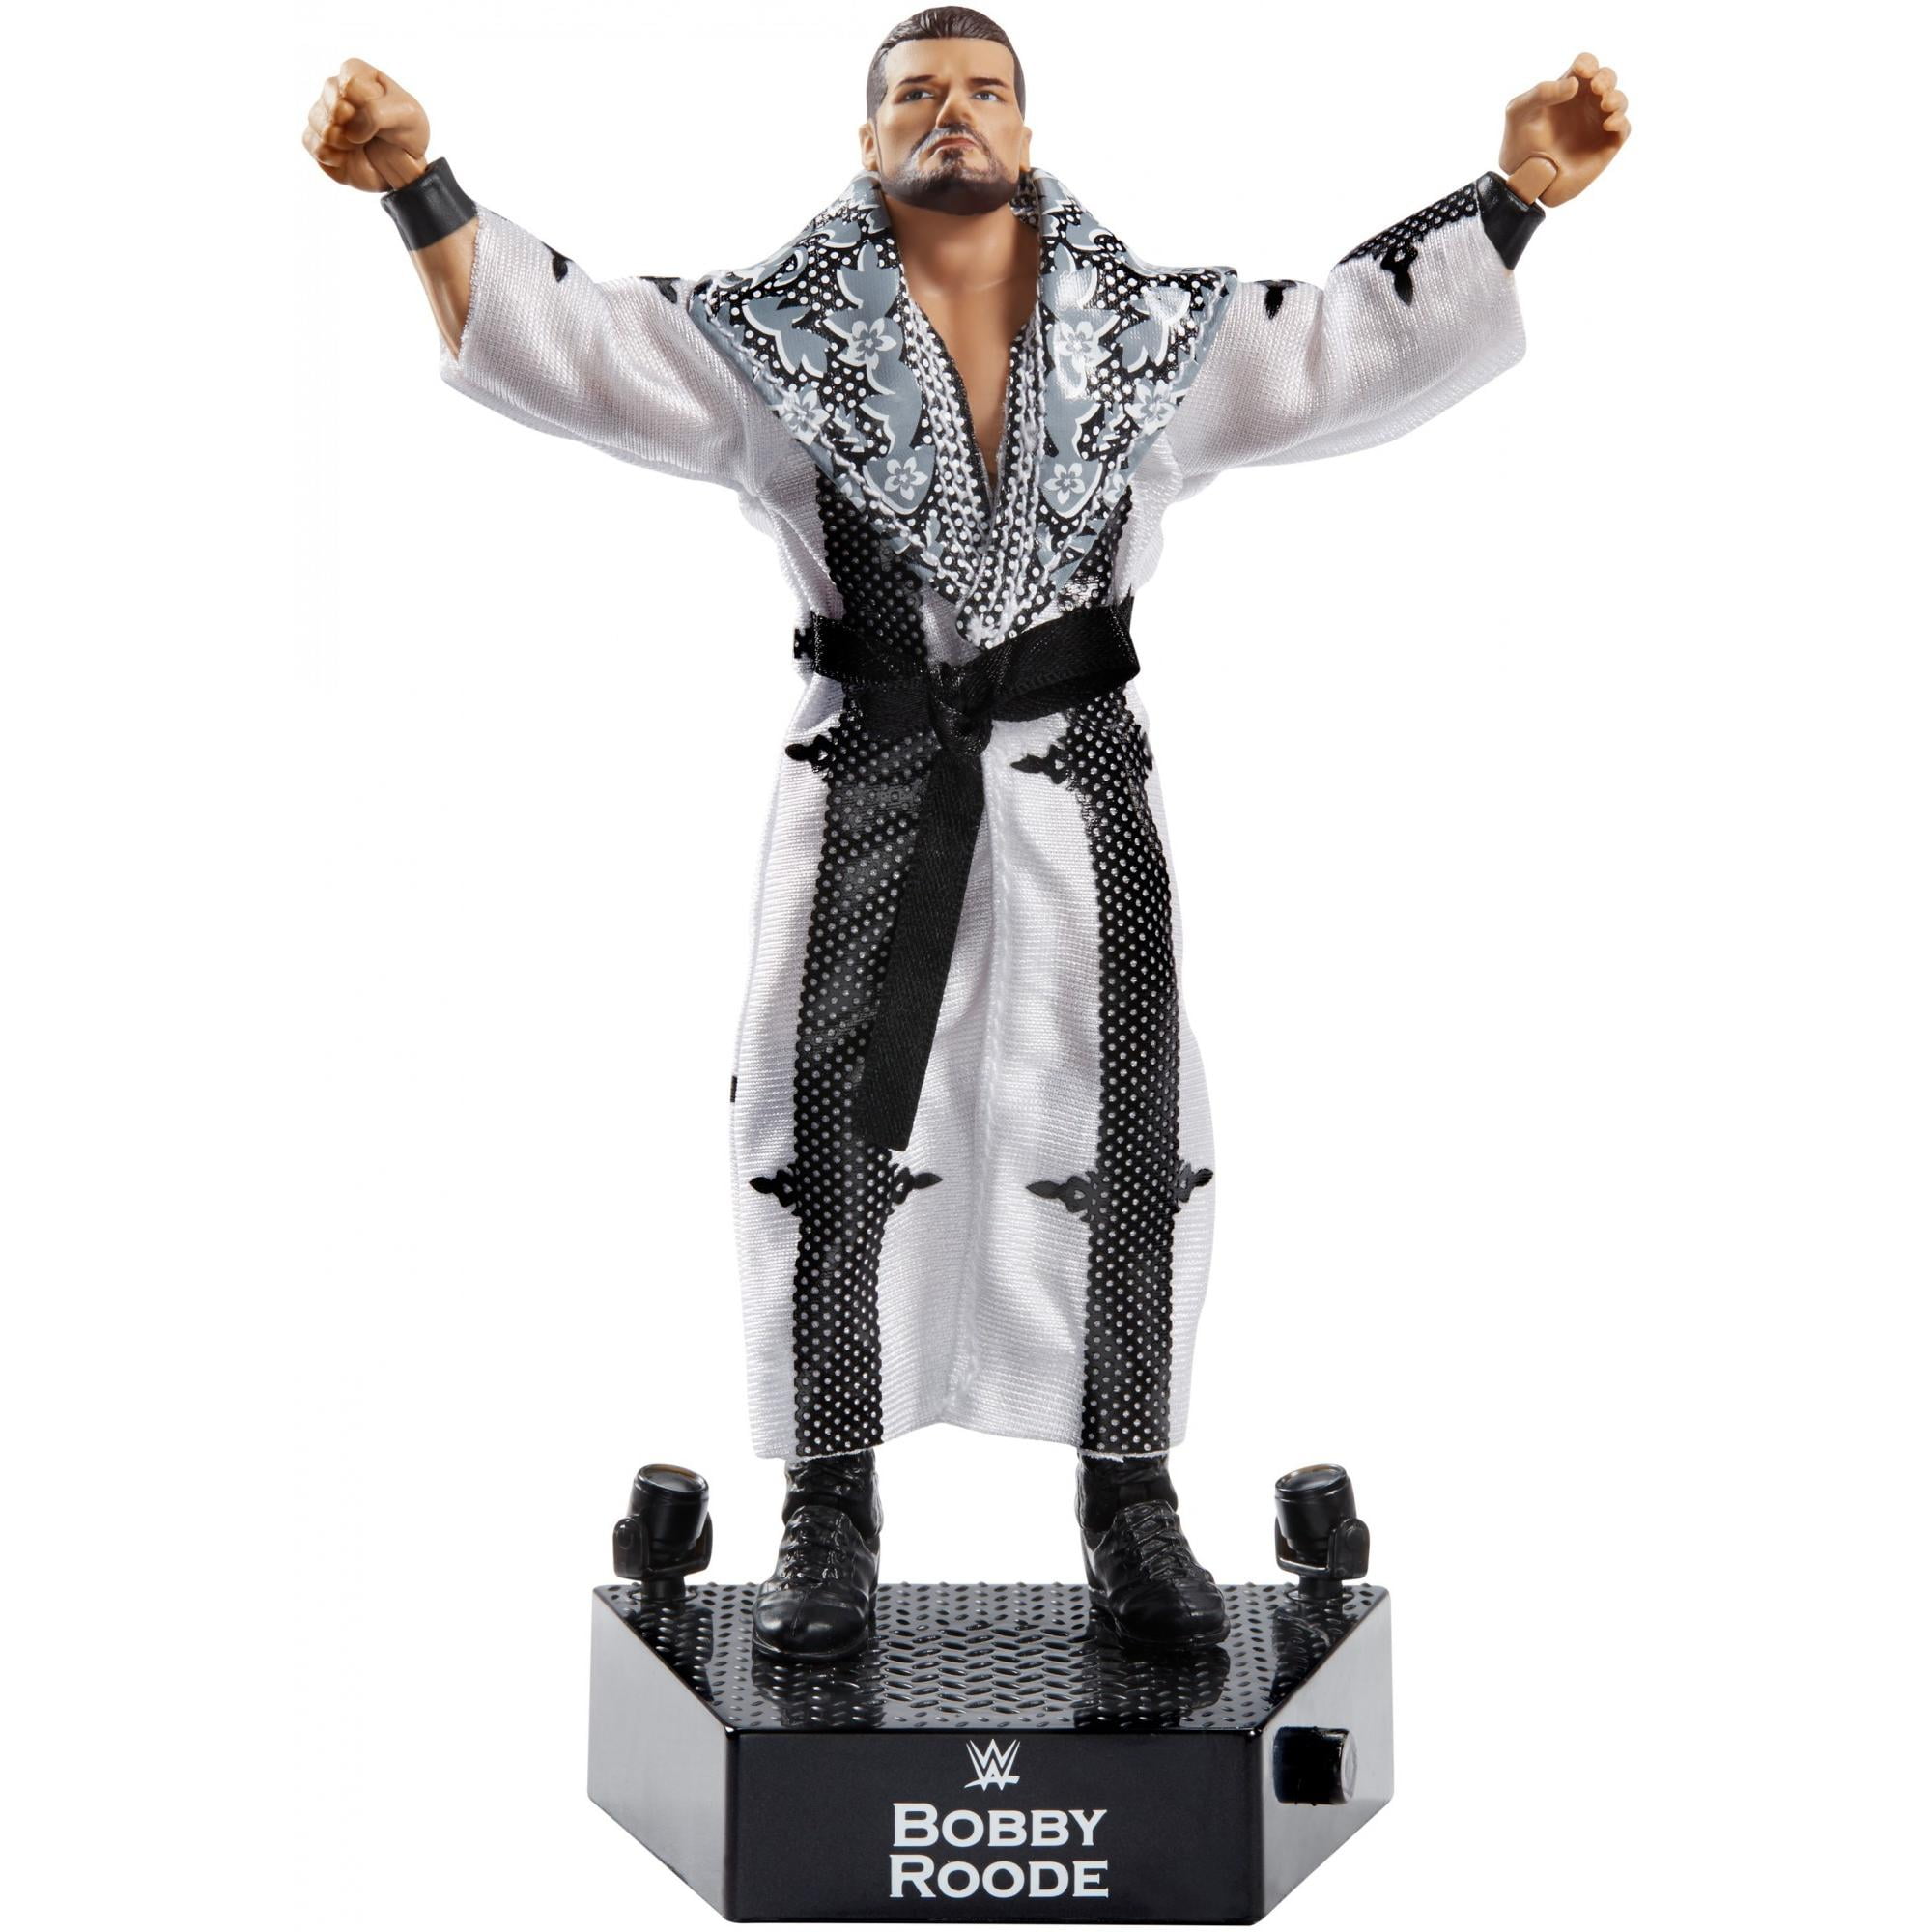 WWE Entrance Greats Bobby Roode Action Figure Toy Play Fun Gift 